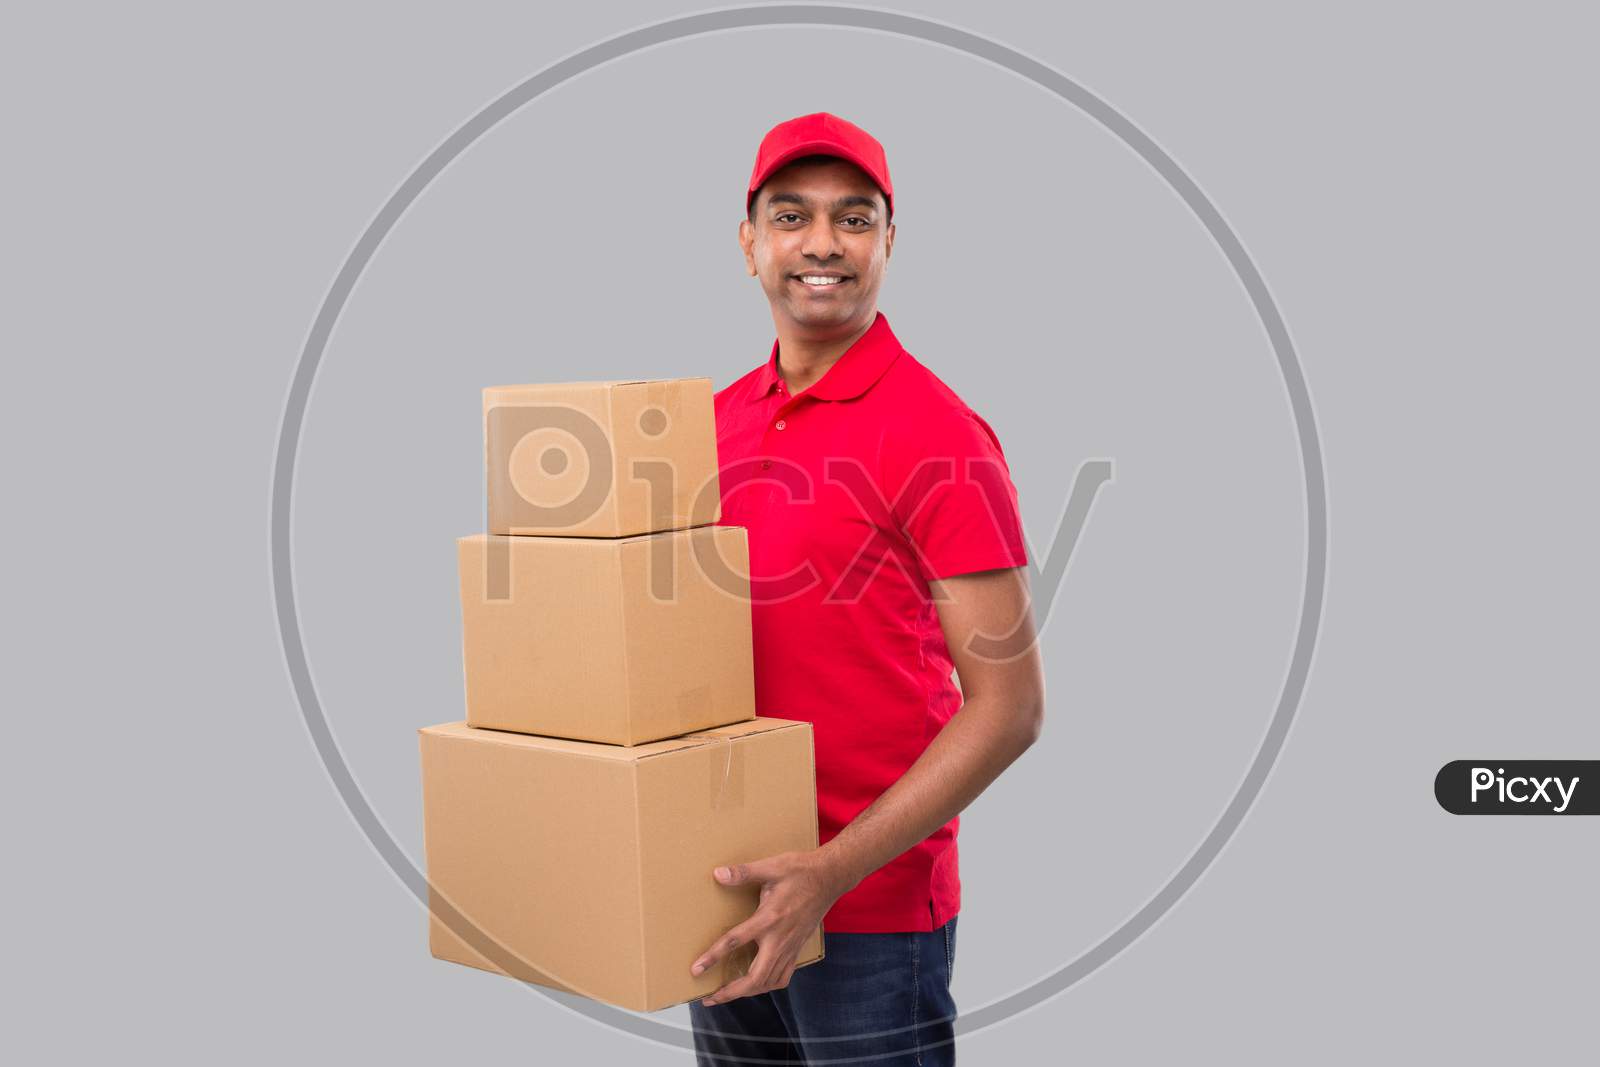 Delivery Man Holding Carton Boxes Isolated. Indian Delivery Boy Smiling With Boxes In Hands